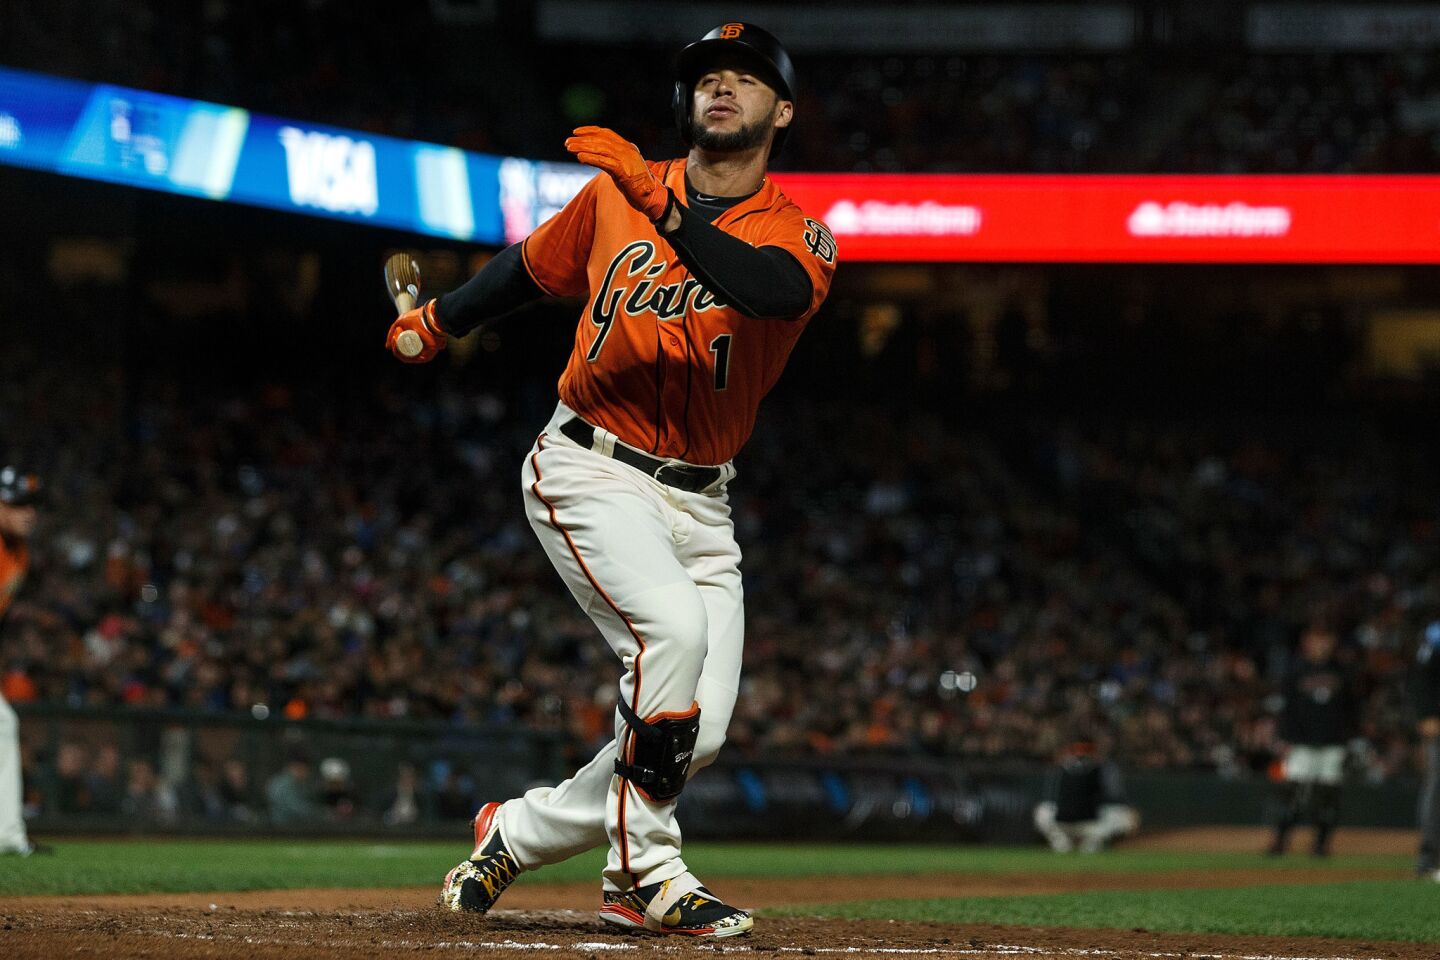 SAN FRANCISCO, CA - SEPTEMBER 28: Gregor Blanco #1 of the San Francisco Giants strikes out against the Los Angeles Dodgers during the seventh inning at AT&T Park on September 28, 2018 in San Francisco, California. The Los Angeles Dodgers defeated the San Francisco Giants 3-1. (Photo by Jason O. Watson/Getty Images) ** OUTS - ELSENT, FPG, CM - OUTS * NM, PH, VA if sourced by CT, LA or MoD **